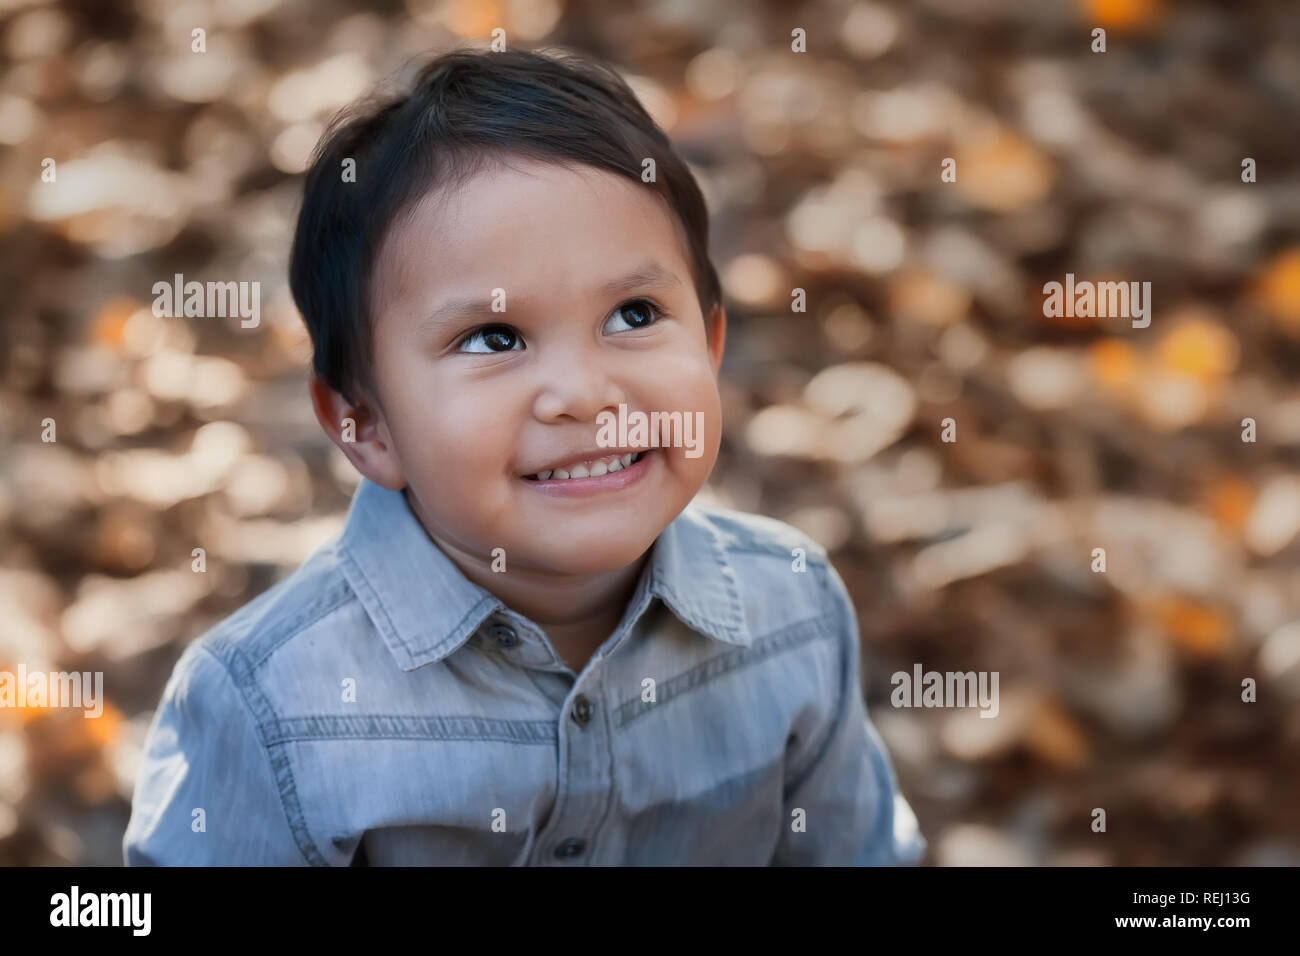 A smiling hispanic boy looking up, gazing into the sky with an expression of hope or day dreaming positive thoughts. Stock Photo